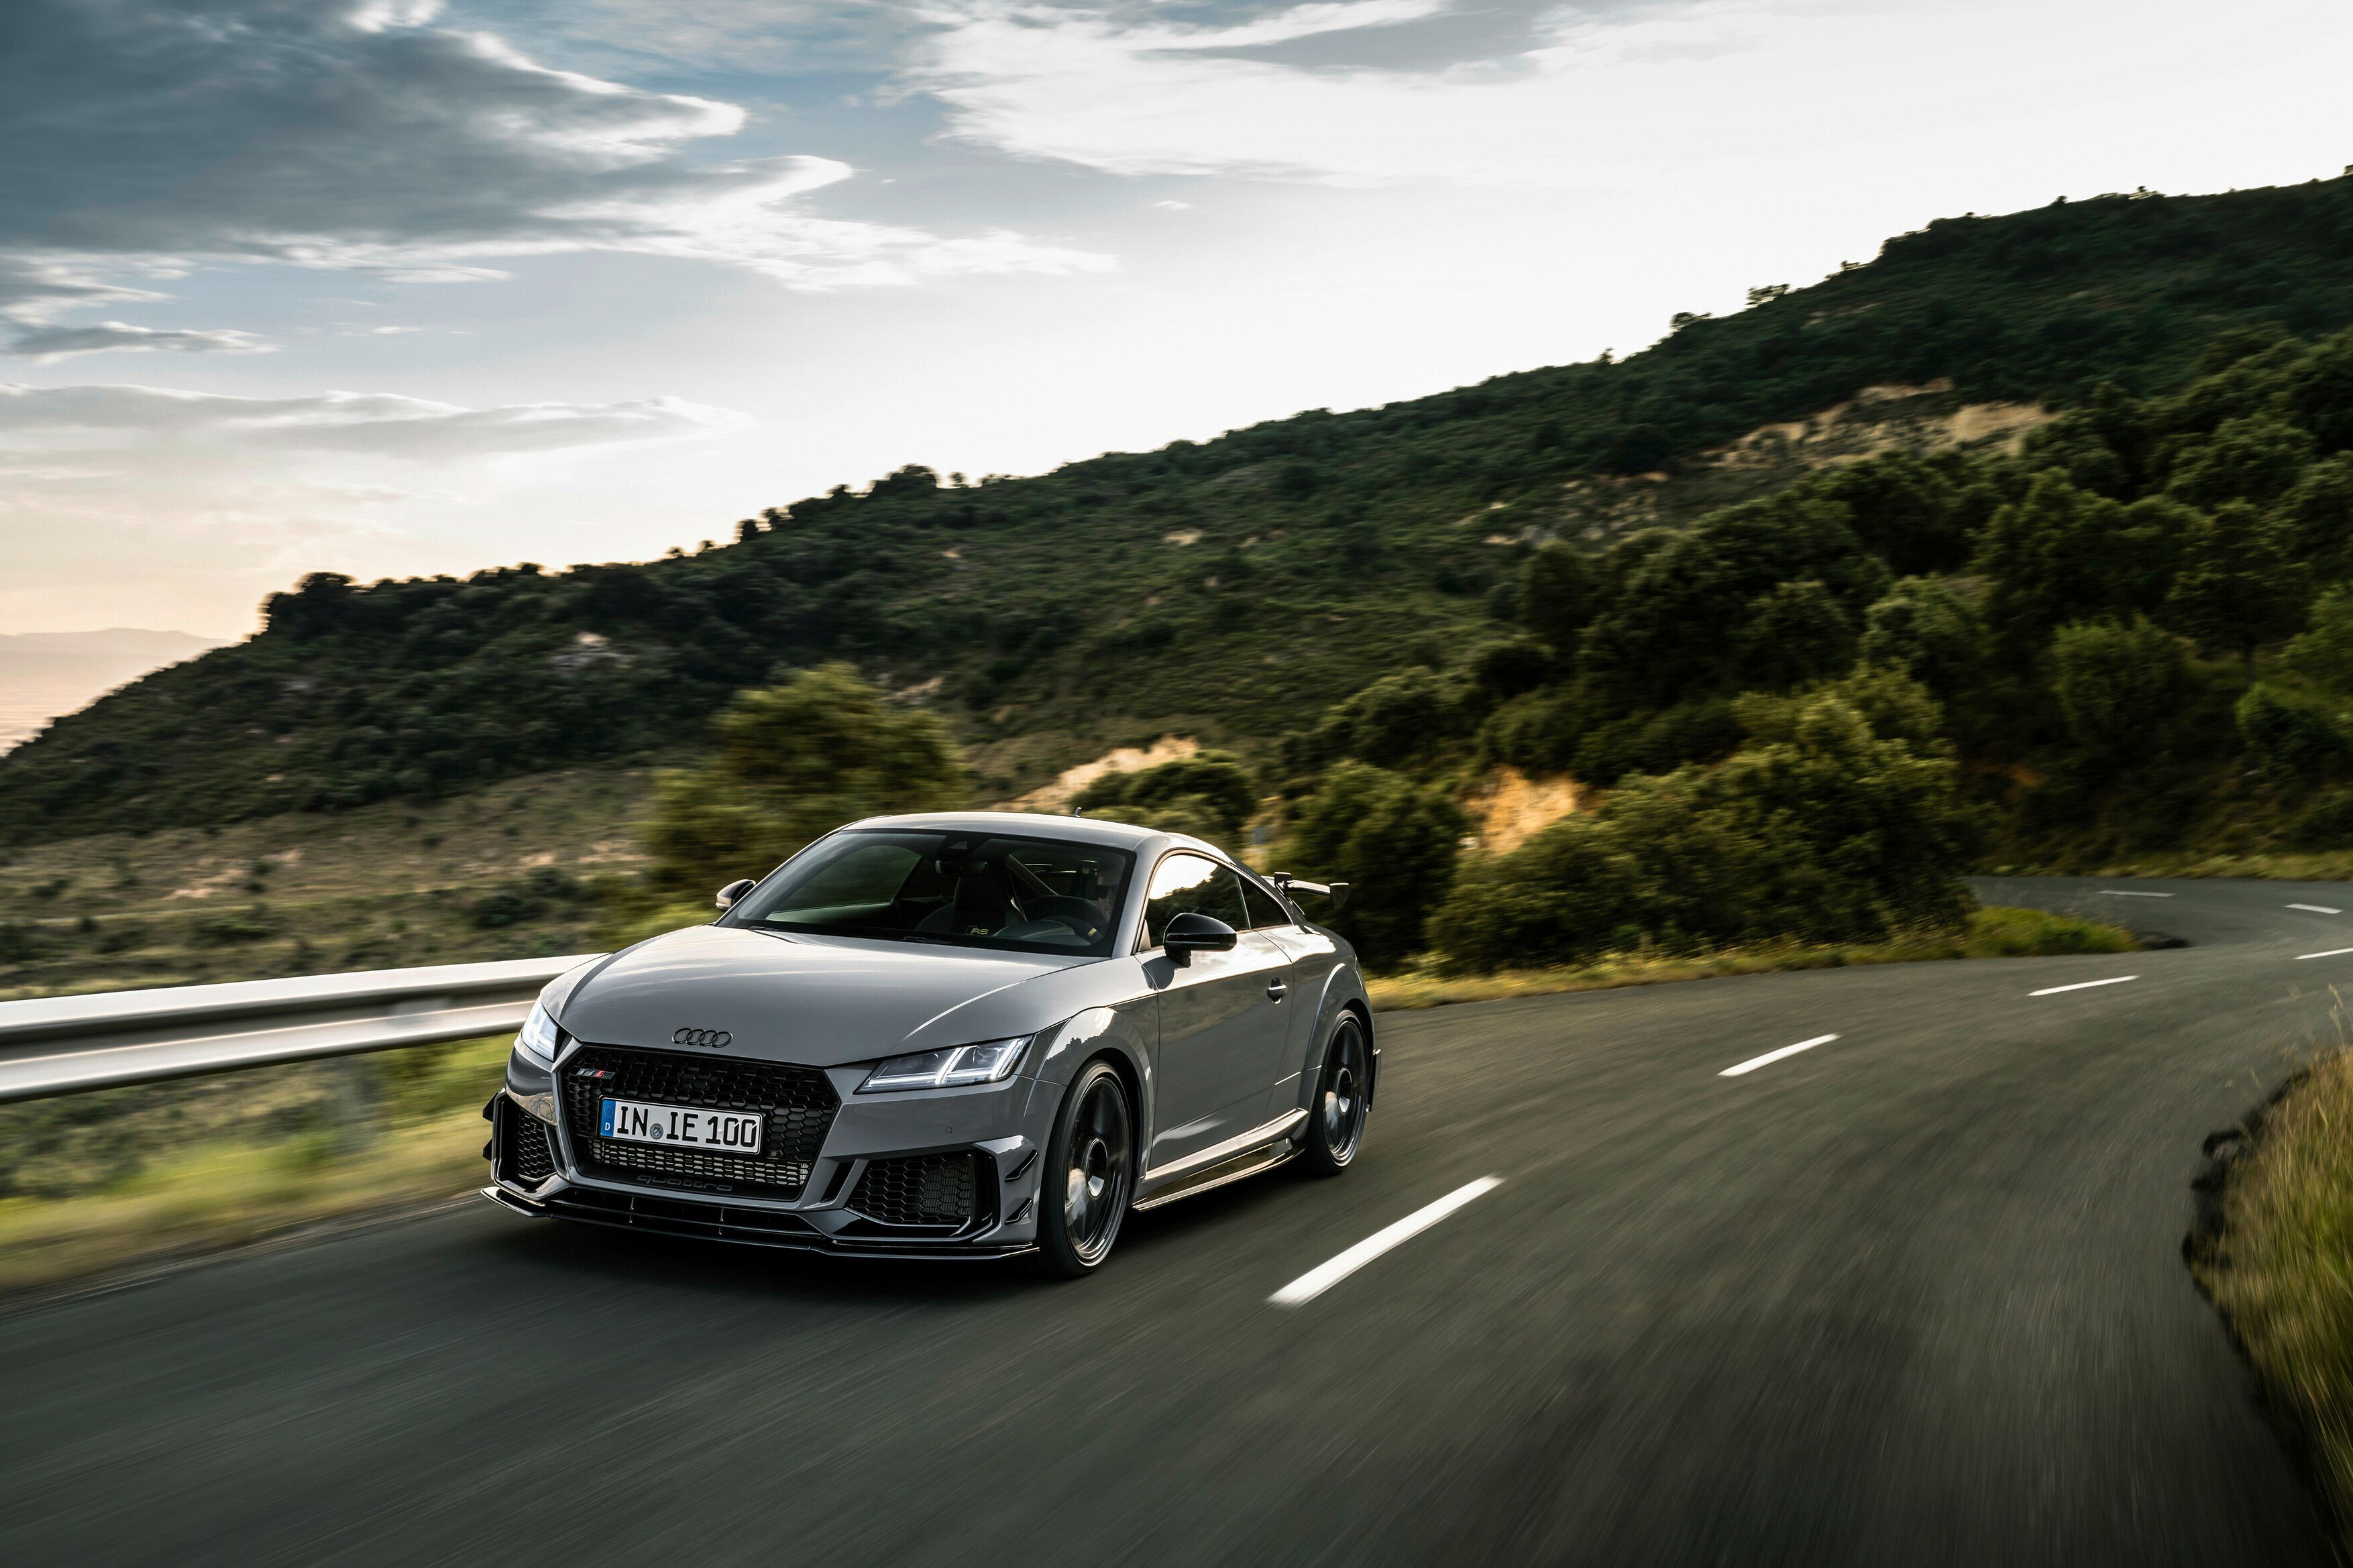 Audi TT RS Iconic Edition Front Quarter View Driving